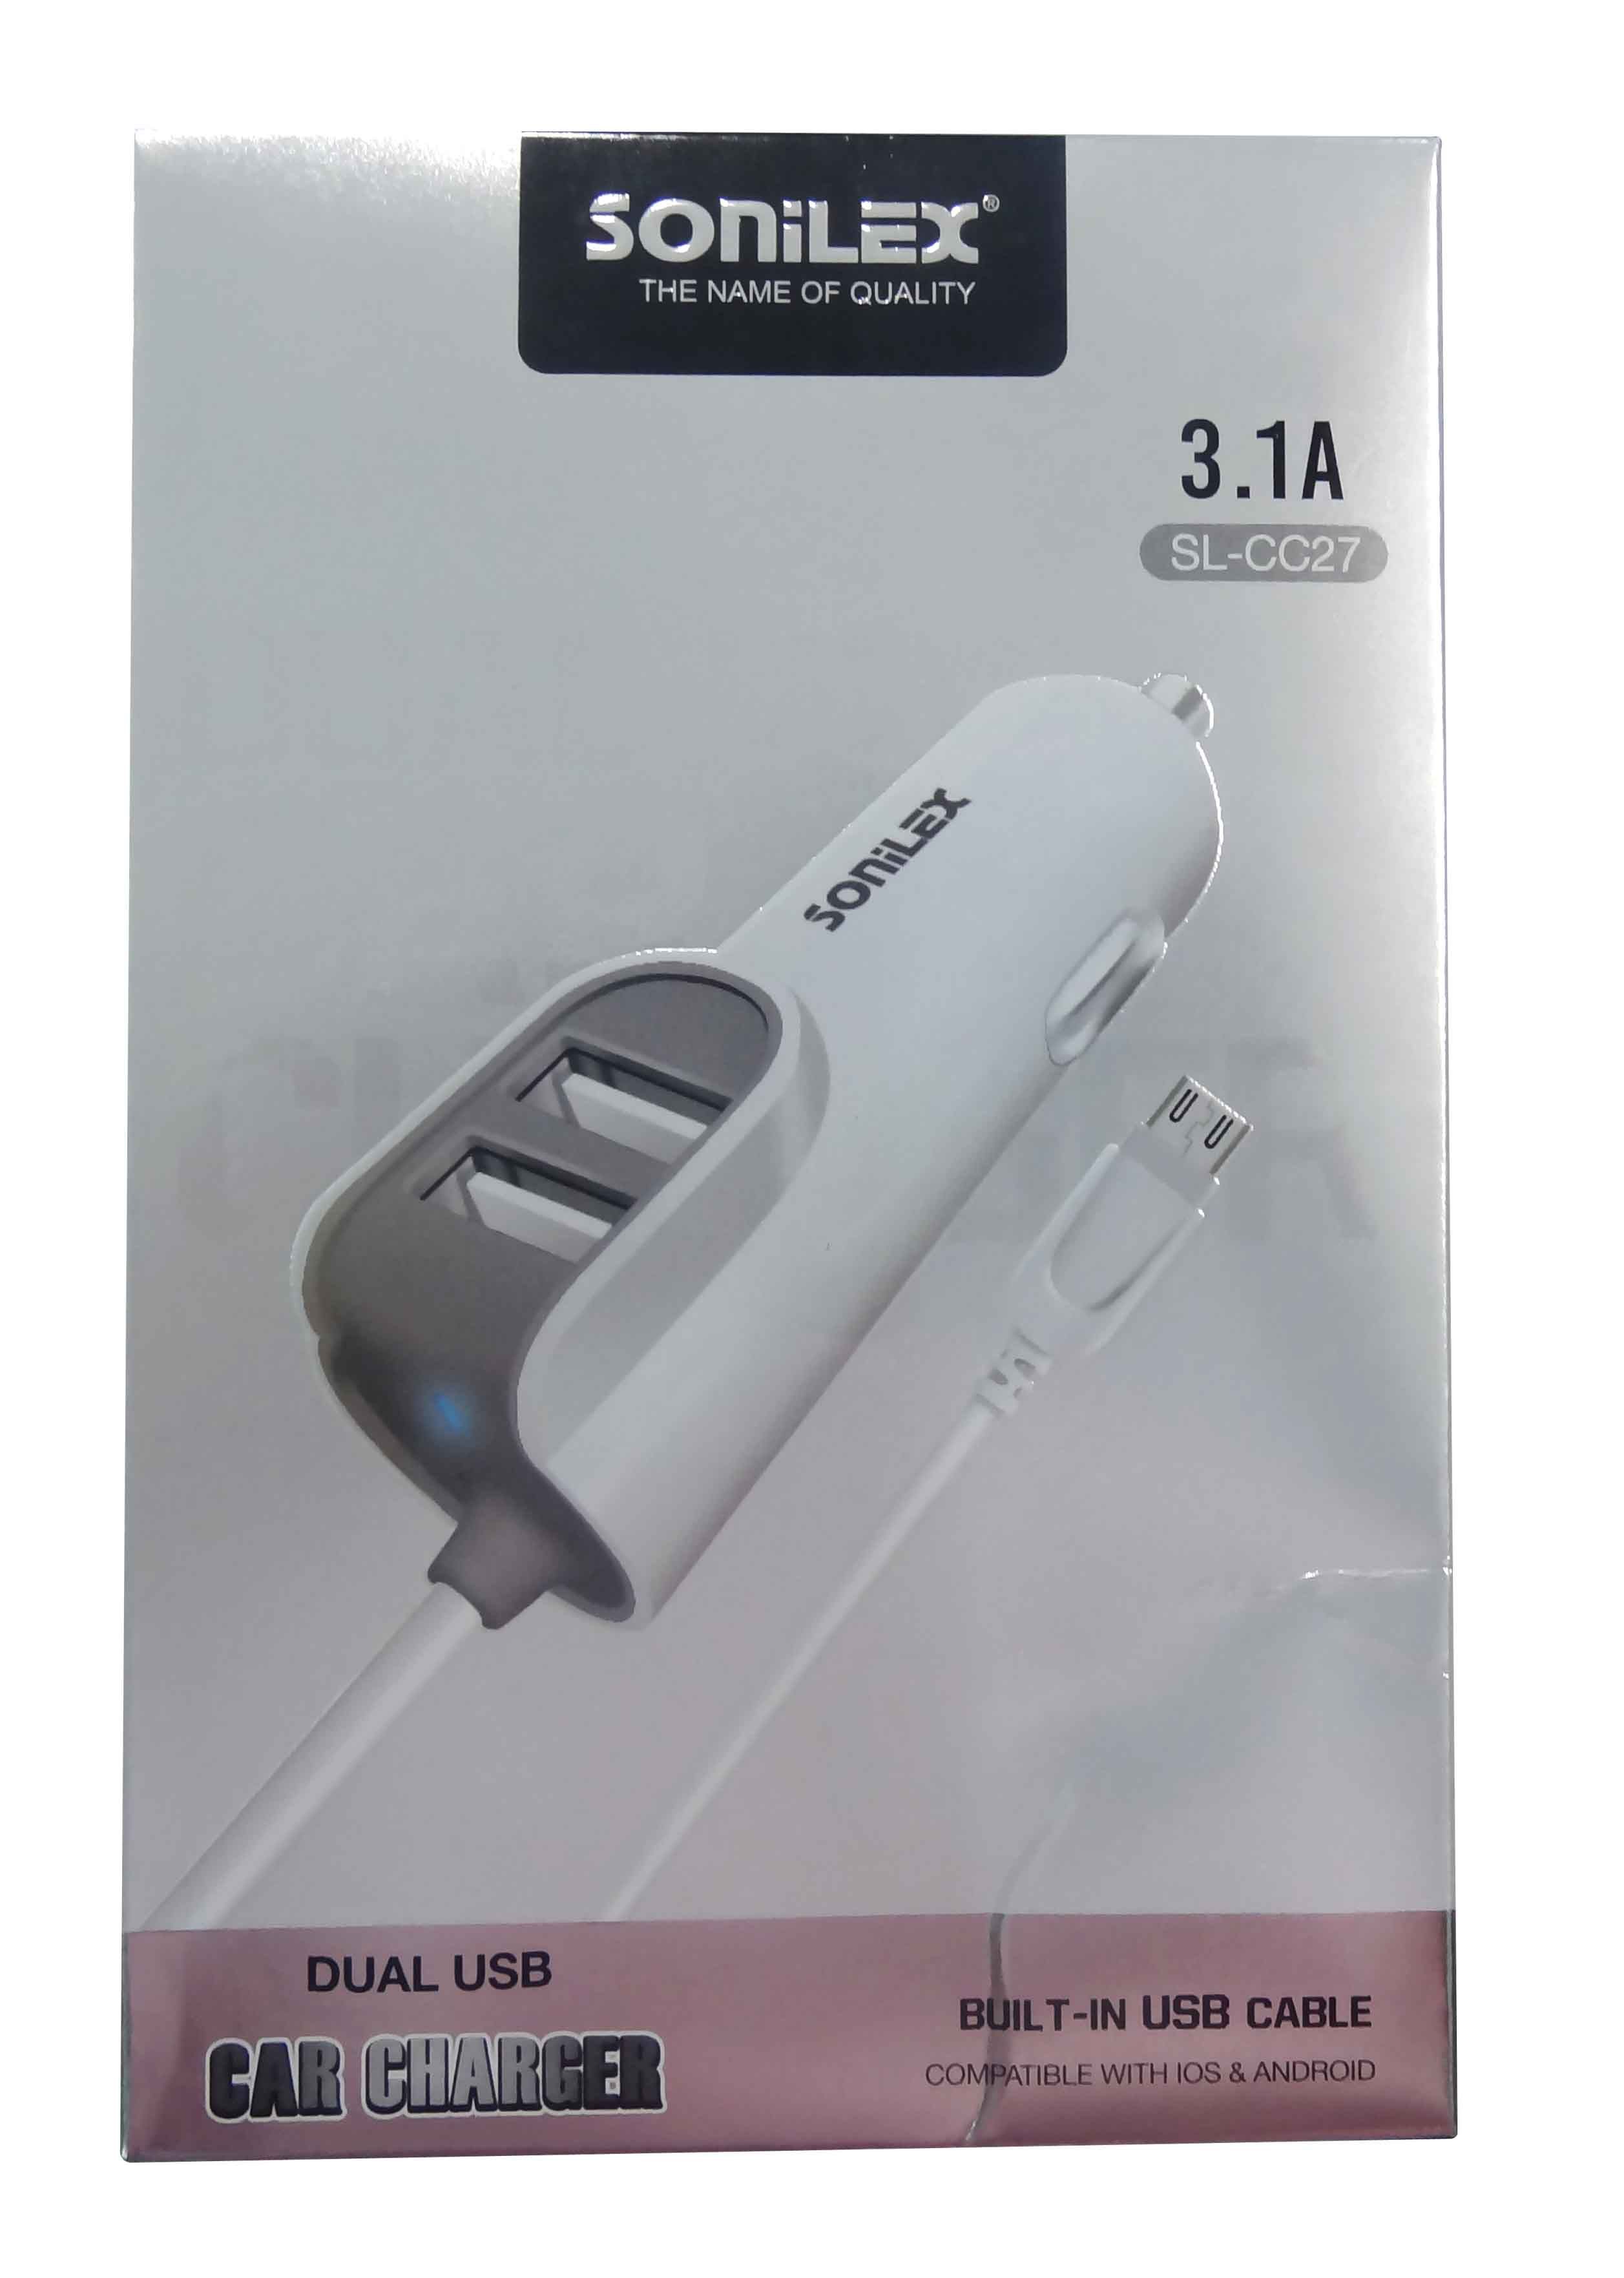 Sonilex SL CC27 3 1A Dual Port Car Mobile Charger White Buy Sonilex SL CC27 3 1A Dual Port Car Mobile Charger White line at Low Price in India on